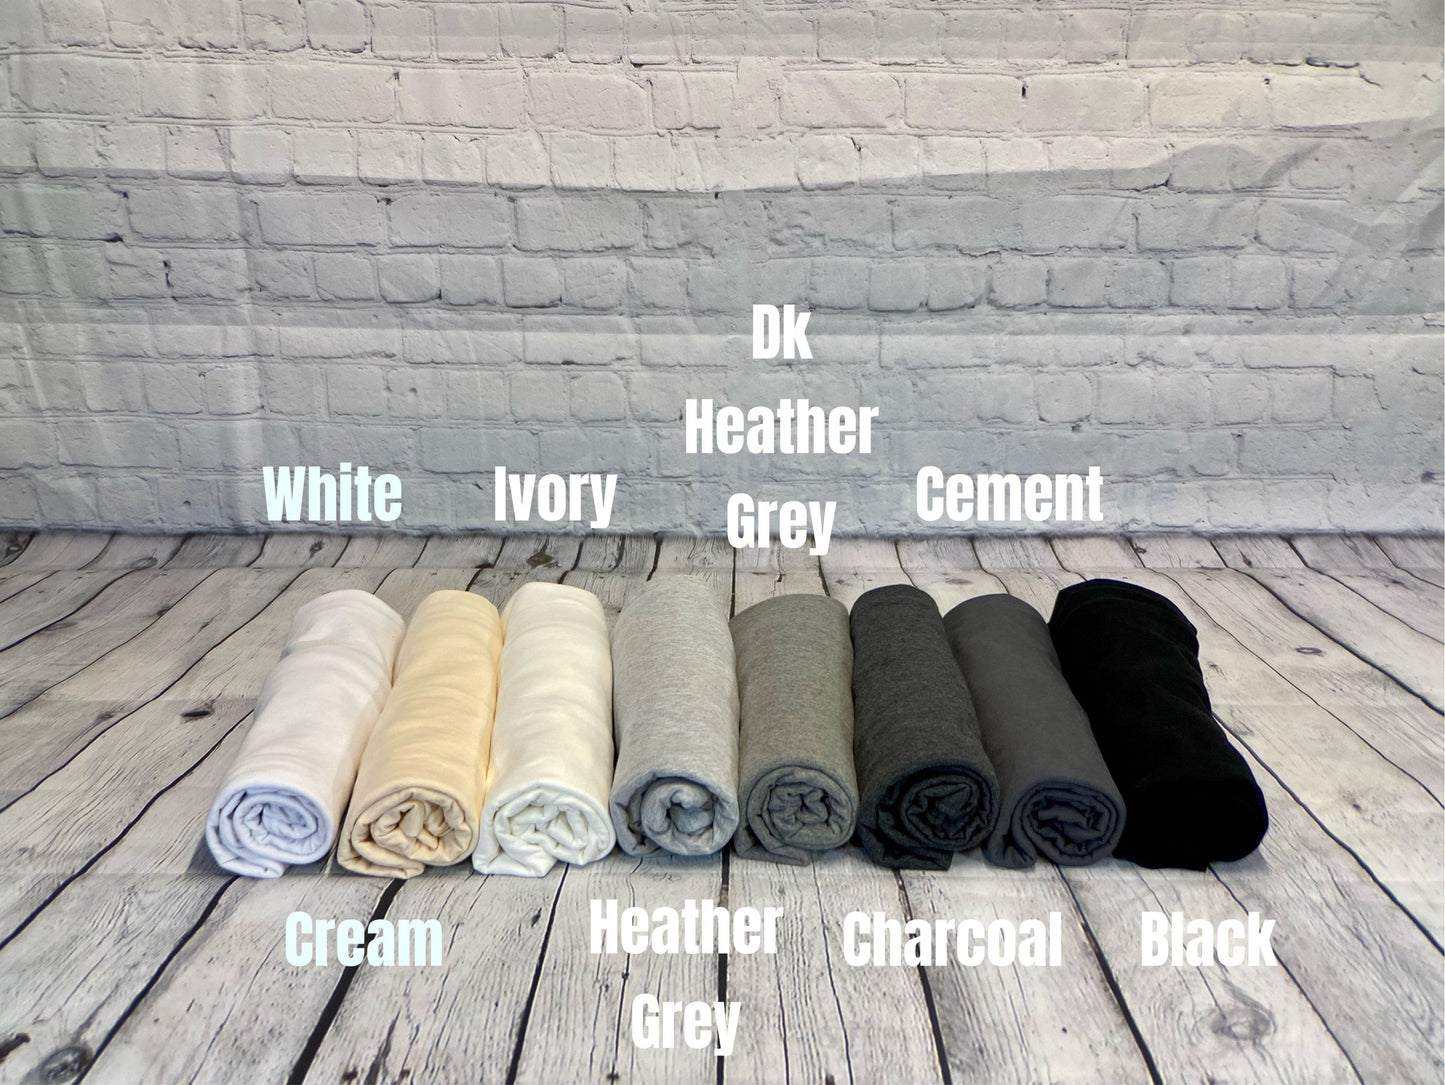 4-Way Stretch Soft Cotton Spandex Fabric Jersey Knit | Bestseller | Fabric By The Yard | Breathable Fabric for Masks or Sports Wear | 60”